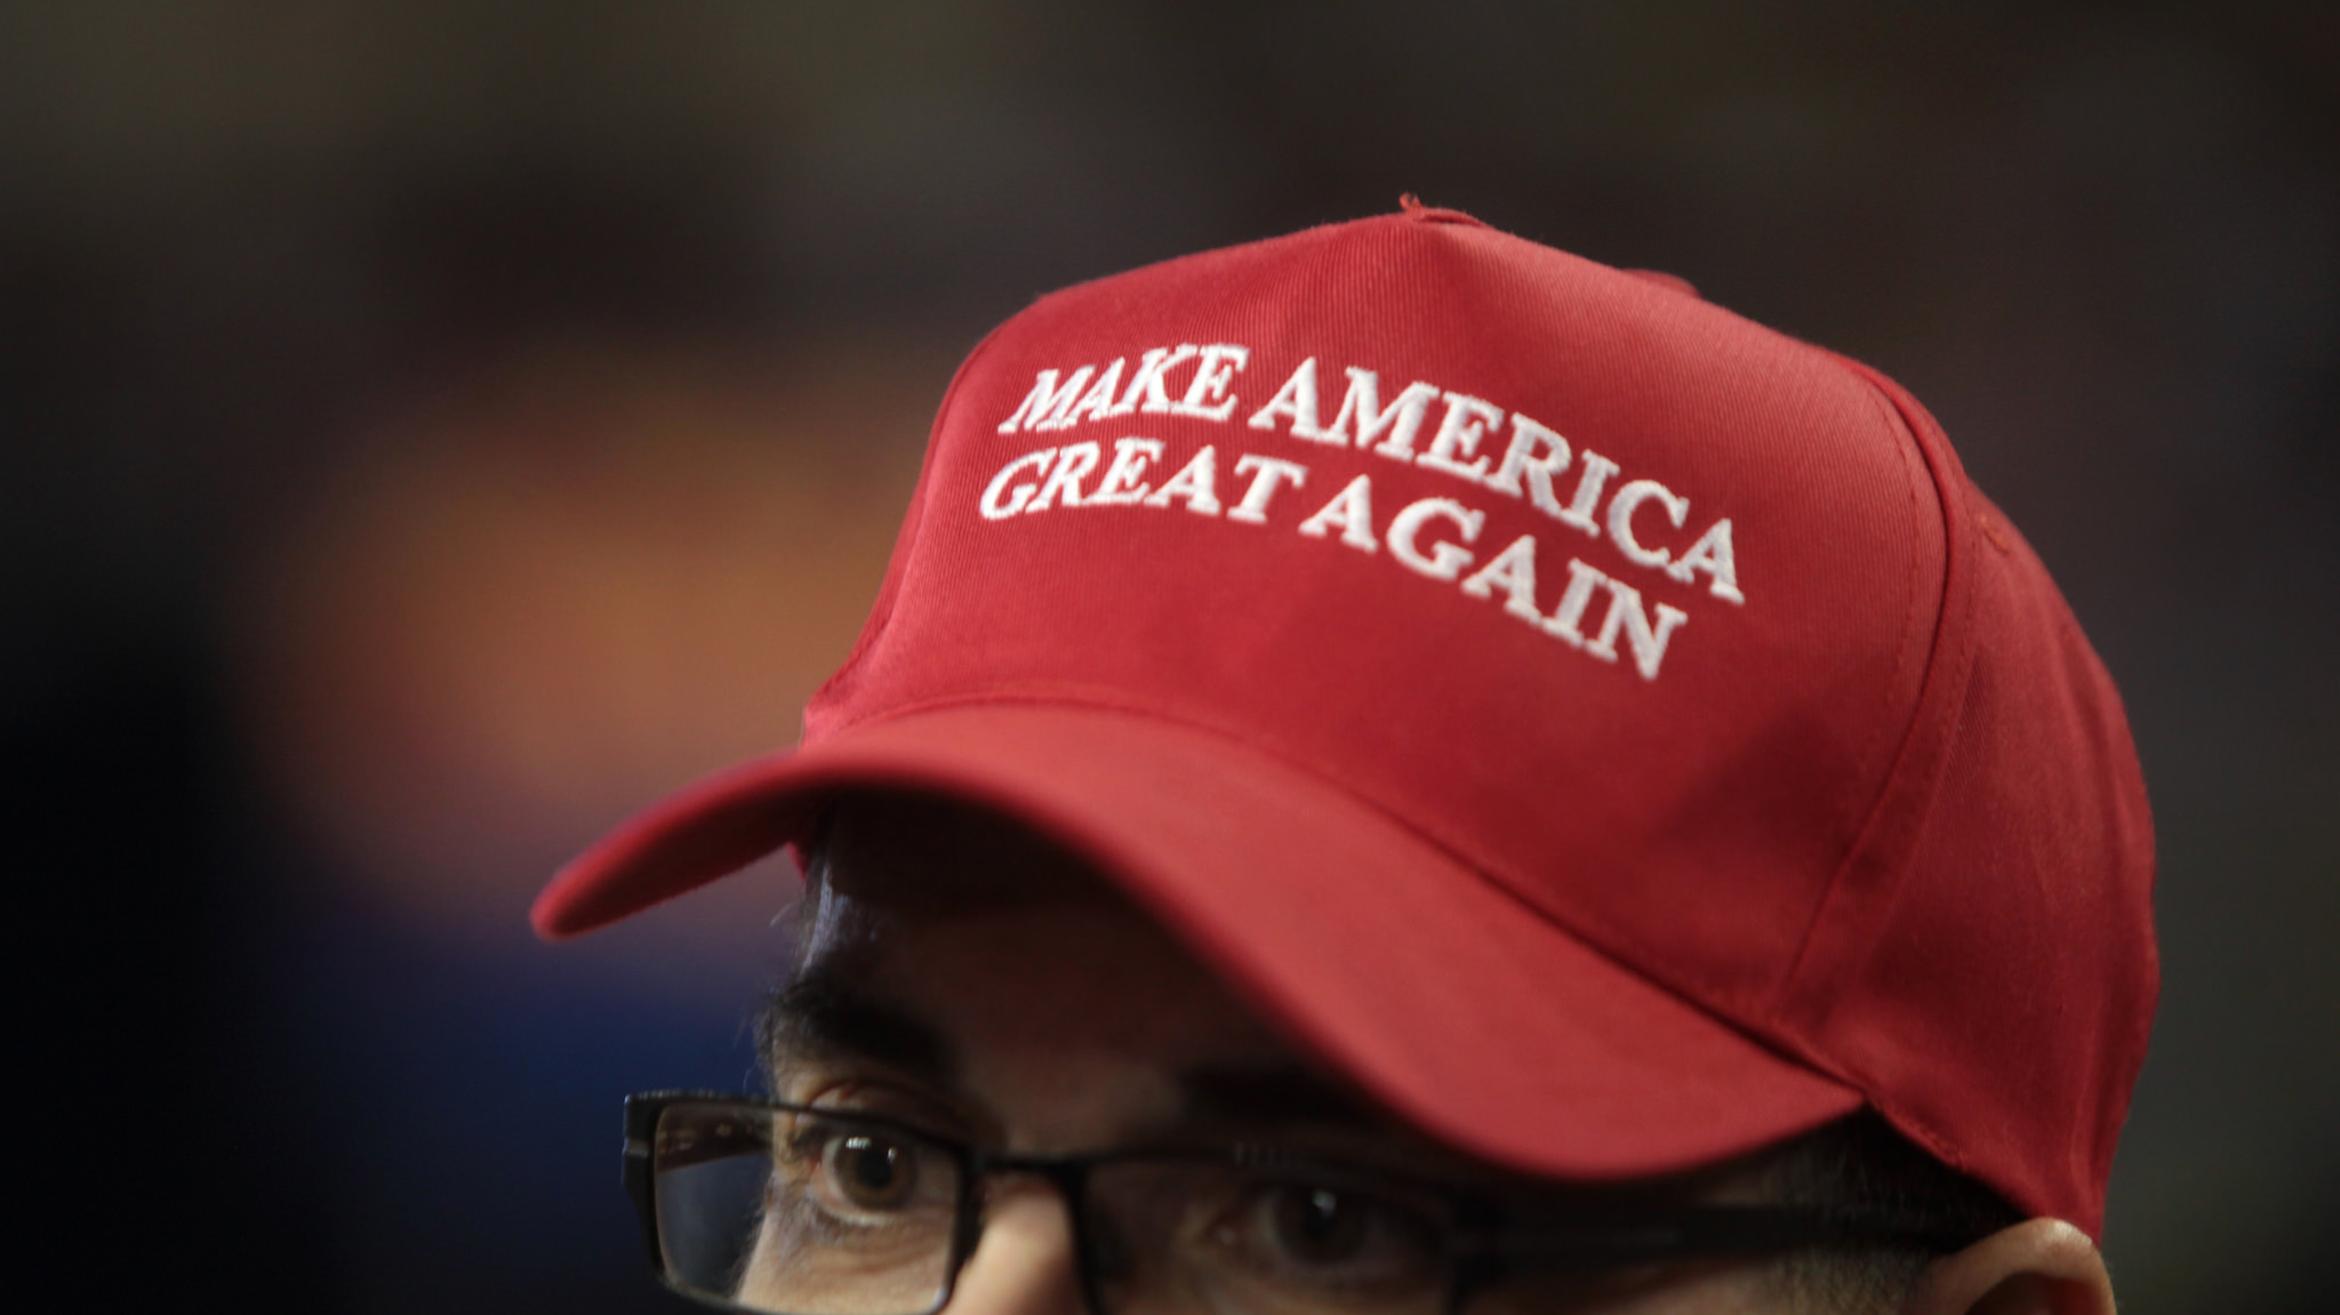 MAKE AMERICA GREAT AGAIN - RED Full TWILL HAT - Trump for sale online - eBay